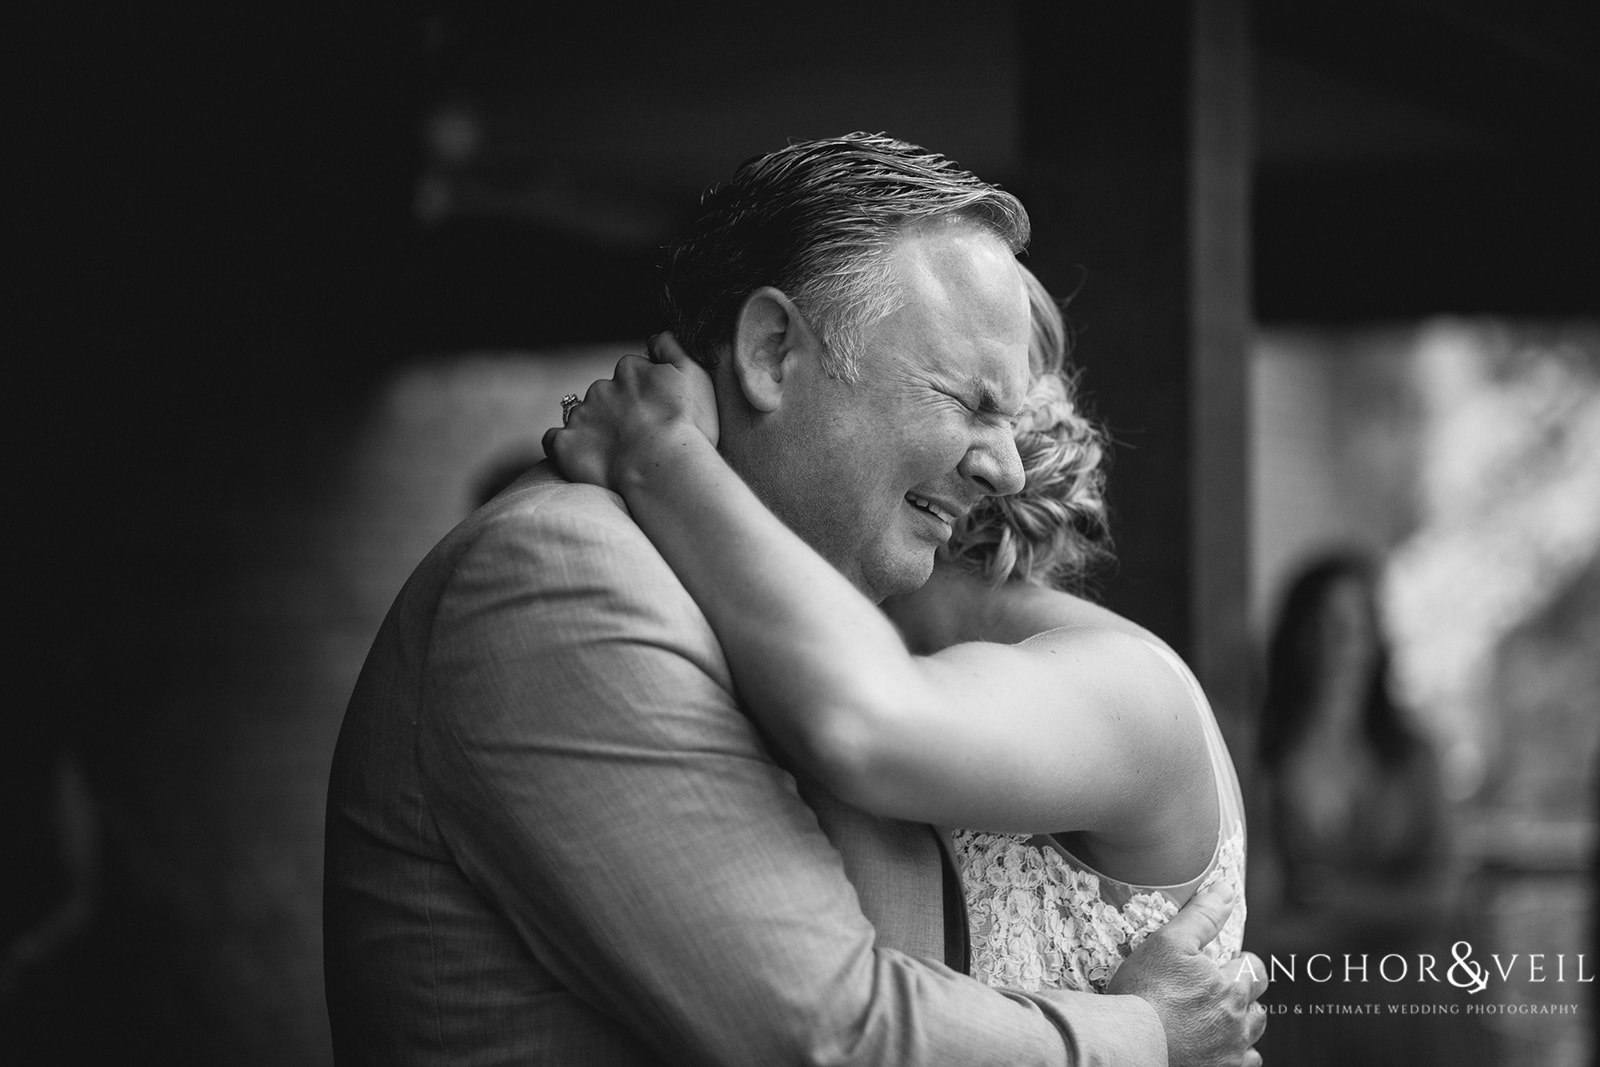 Special moment between the Bride and her dad before the ceremony starts atThe Farm at Brusharbor Wedding